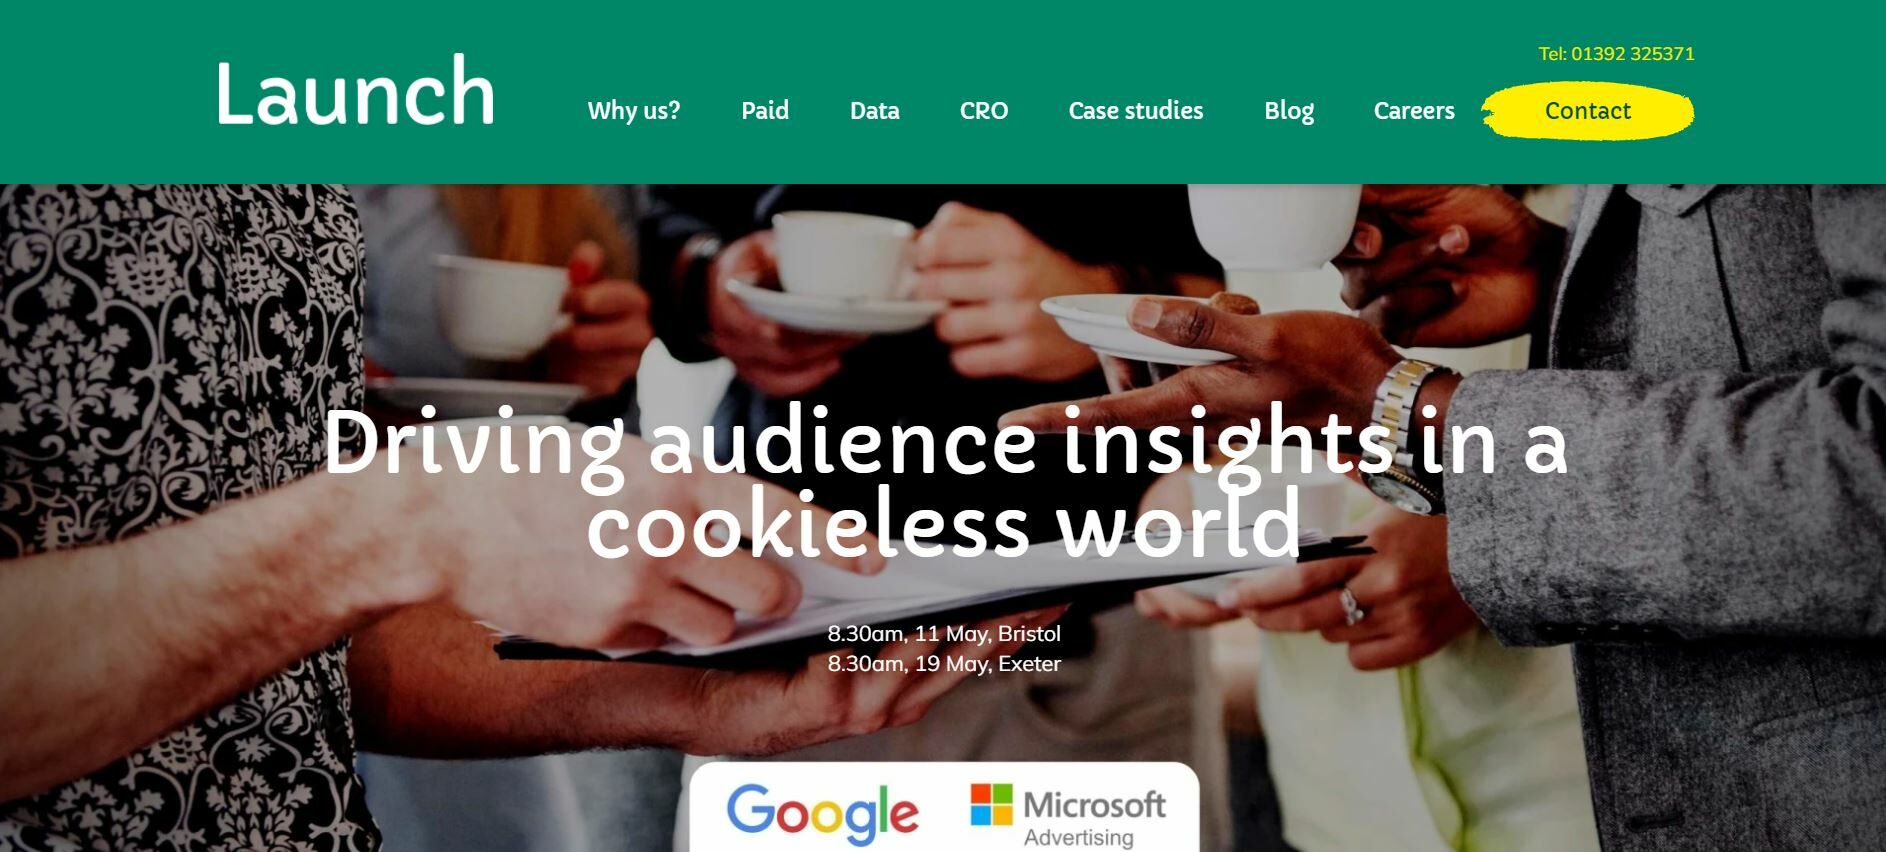 Launch Online: Driving Audience Insights in A Cookieless World.